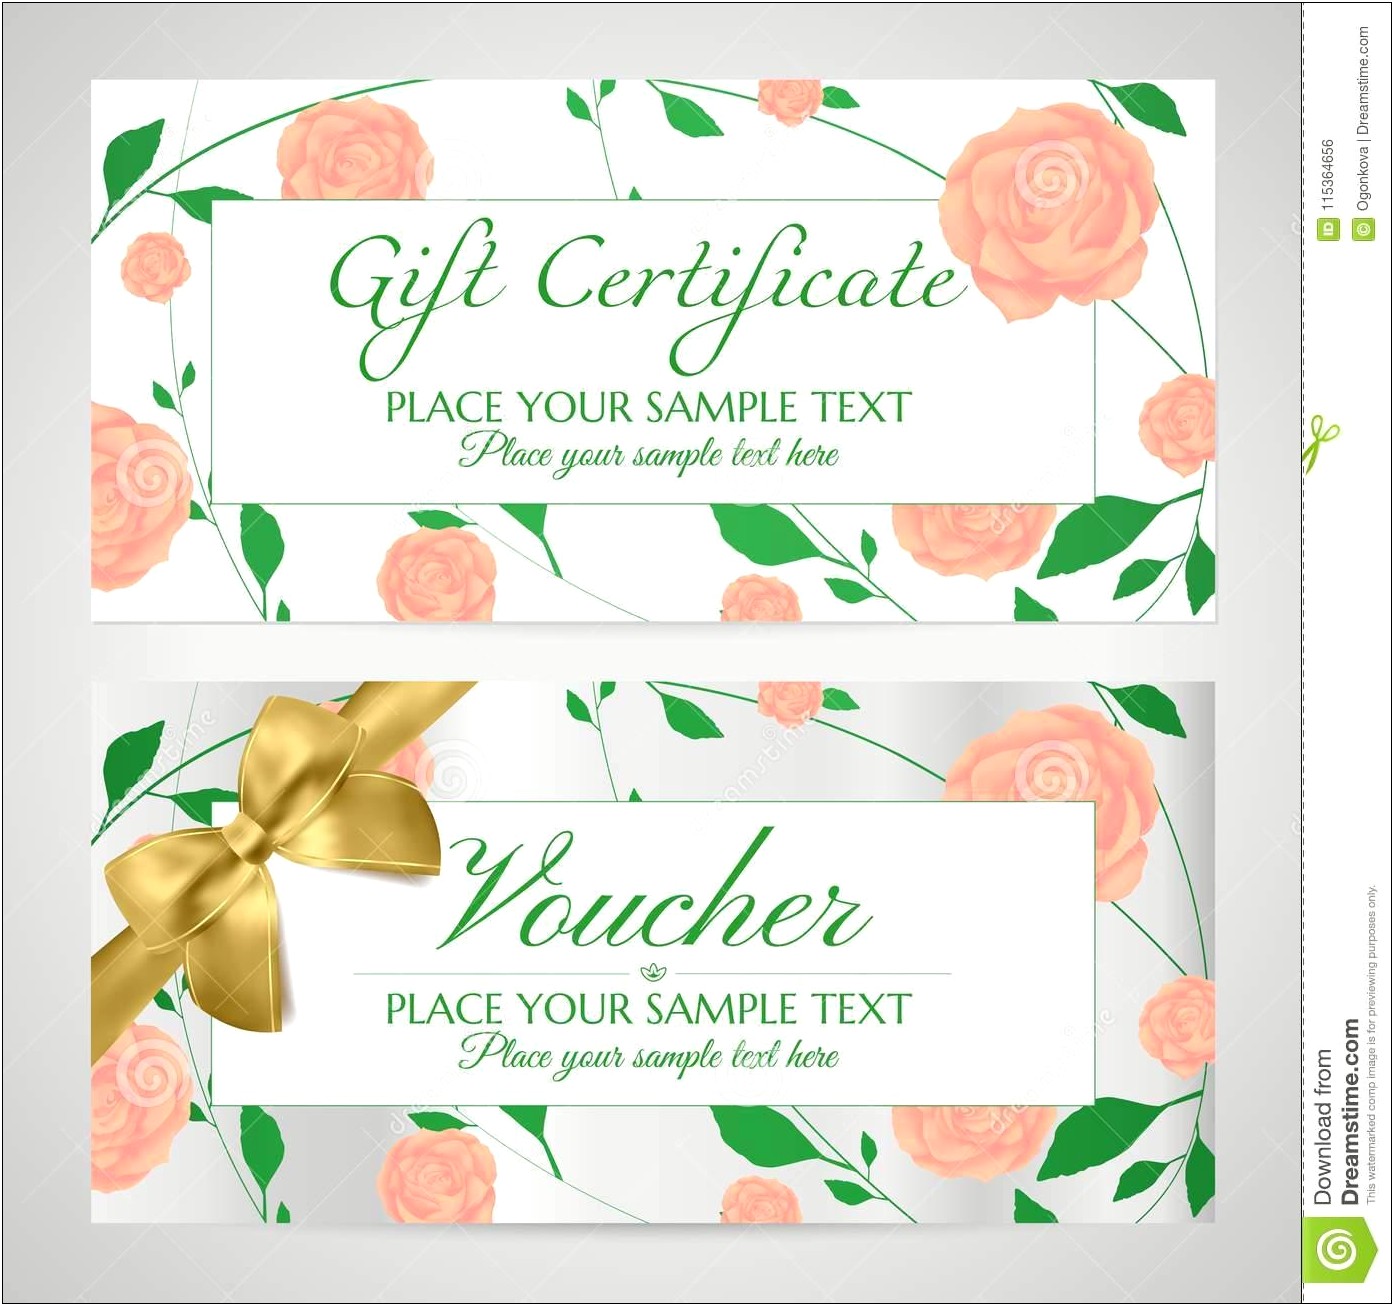 free-hp-printable-mothers-day-certificate-templates-templates